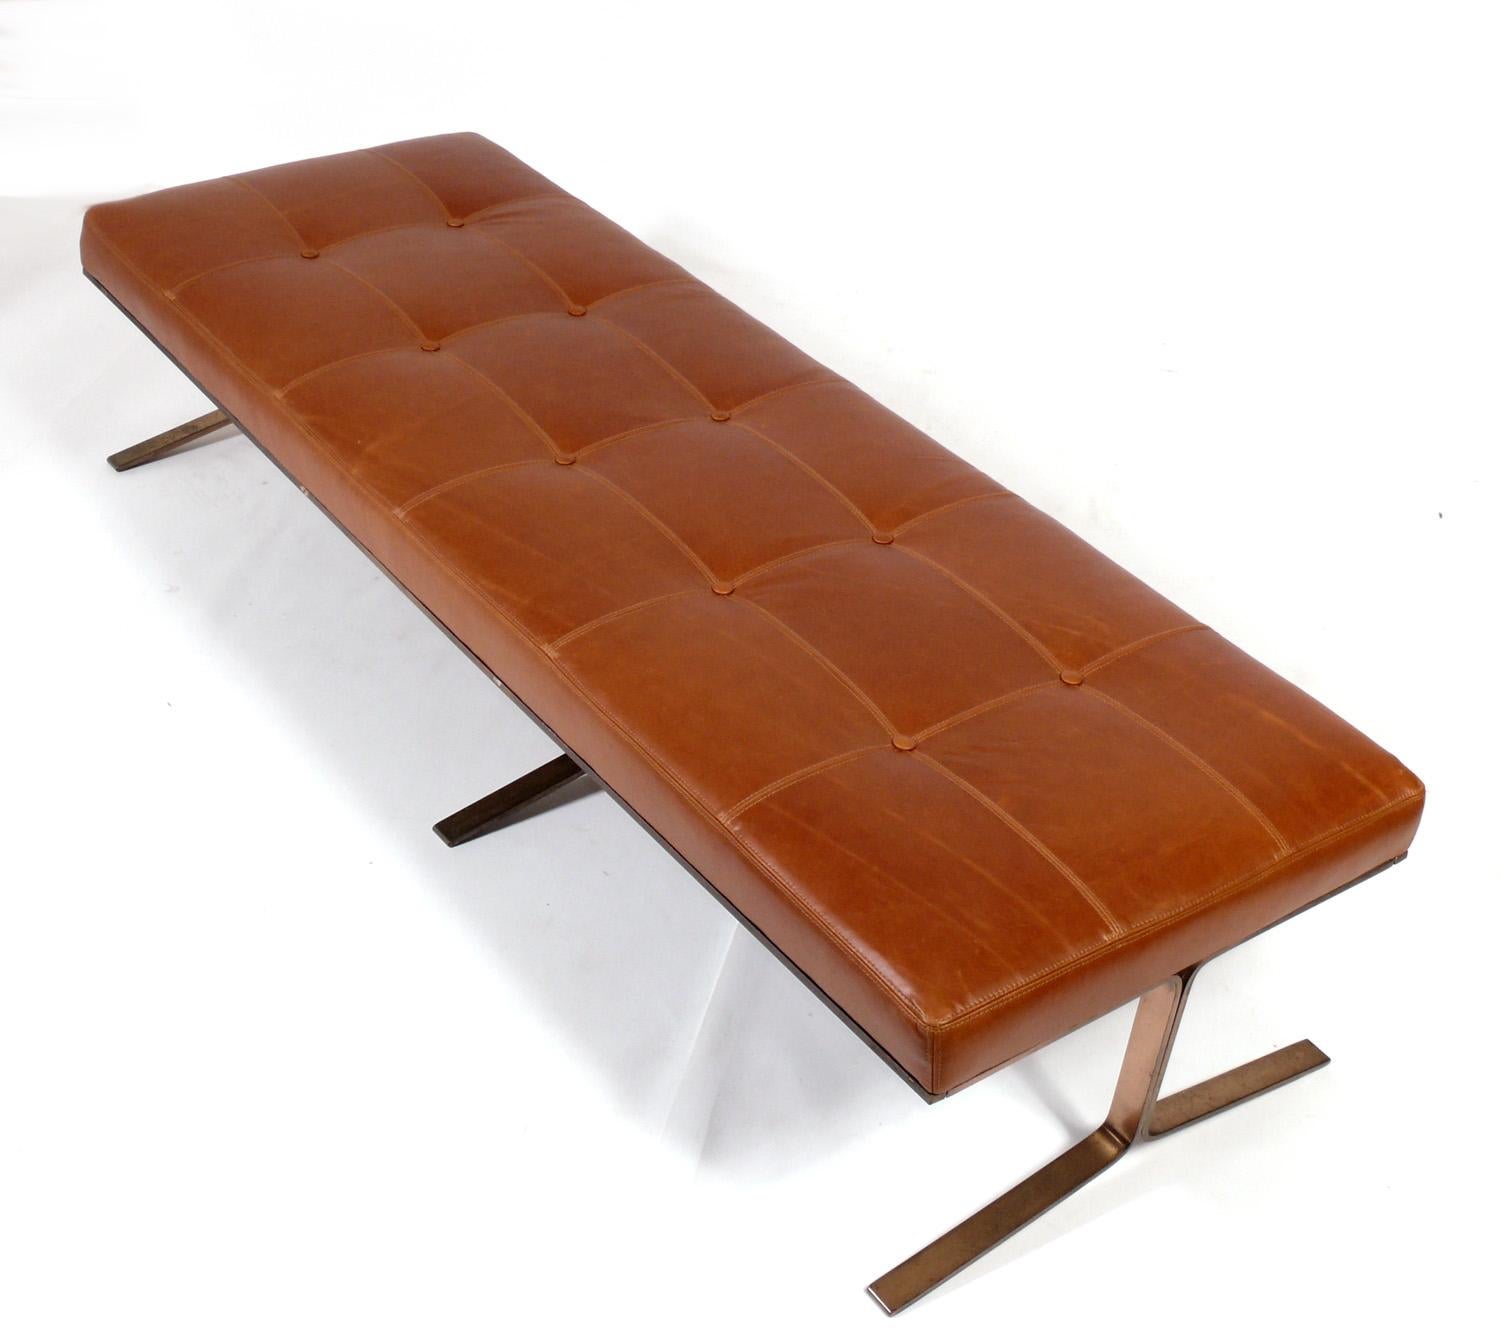 Bronze and caramel color leather daybed or bench, designed by Nicos Zographos, American, circa 1960s. Retains warm original patina to the bronze.